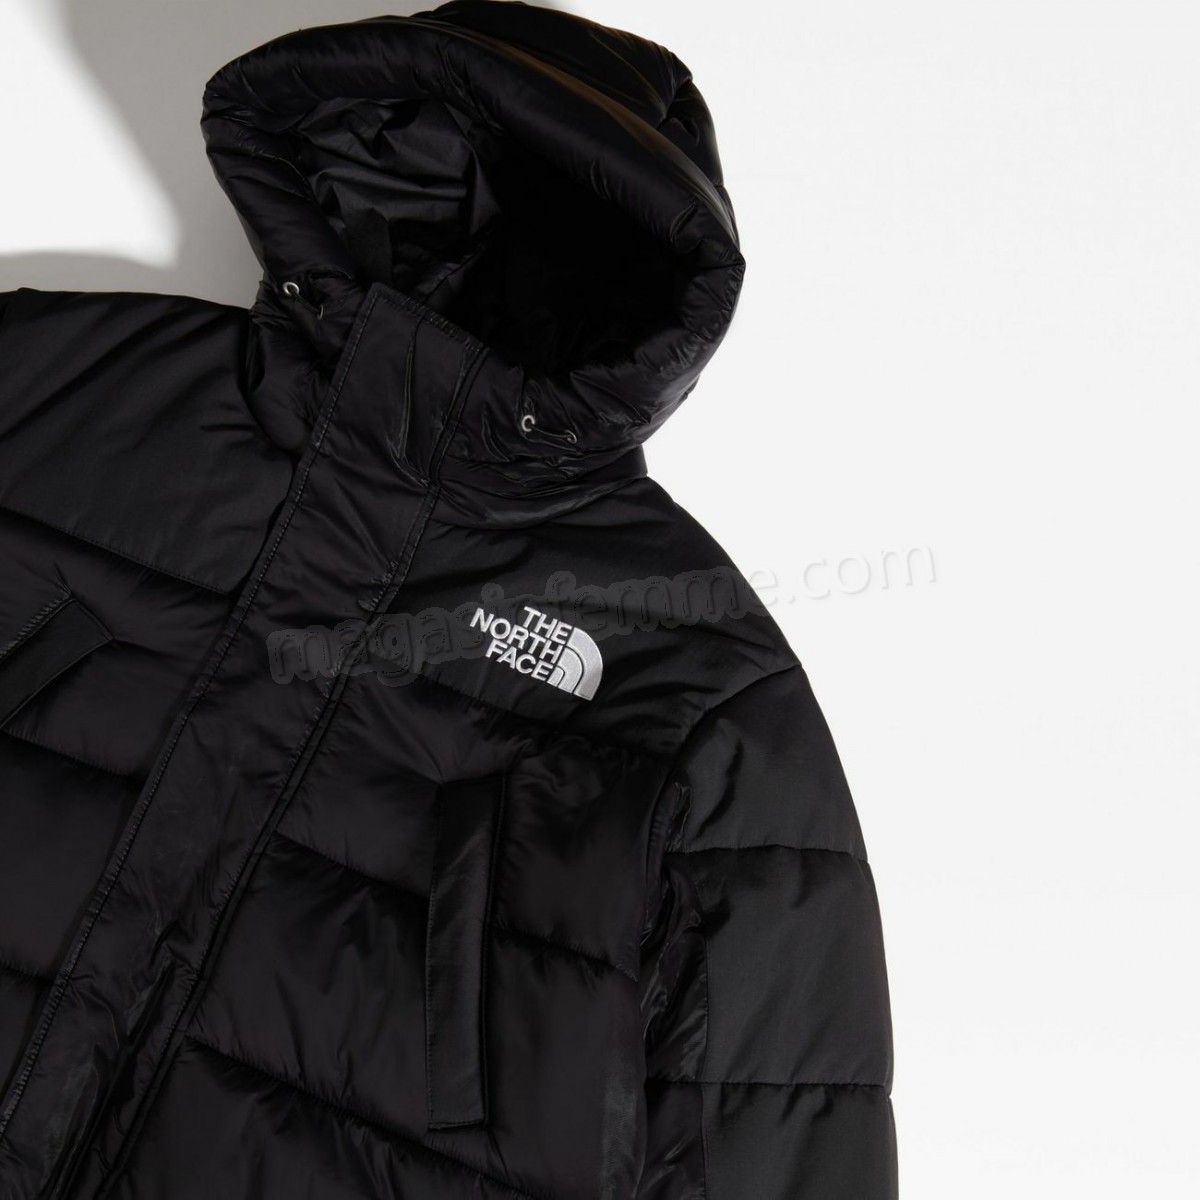 The North Face-mode homme THE NORTH FACE Himalayan Insulated Parka en solde - -22